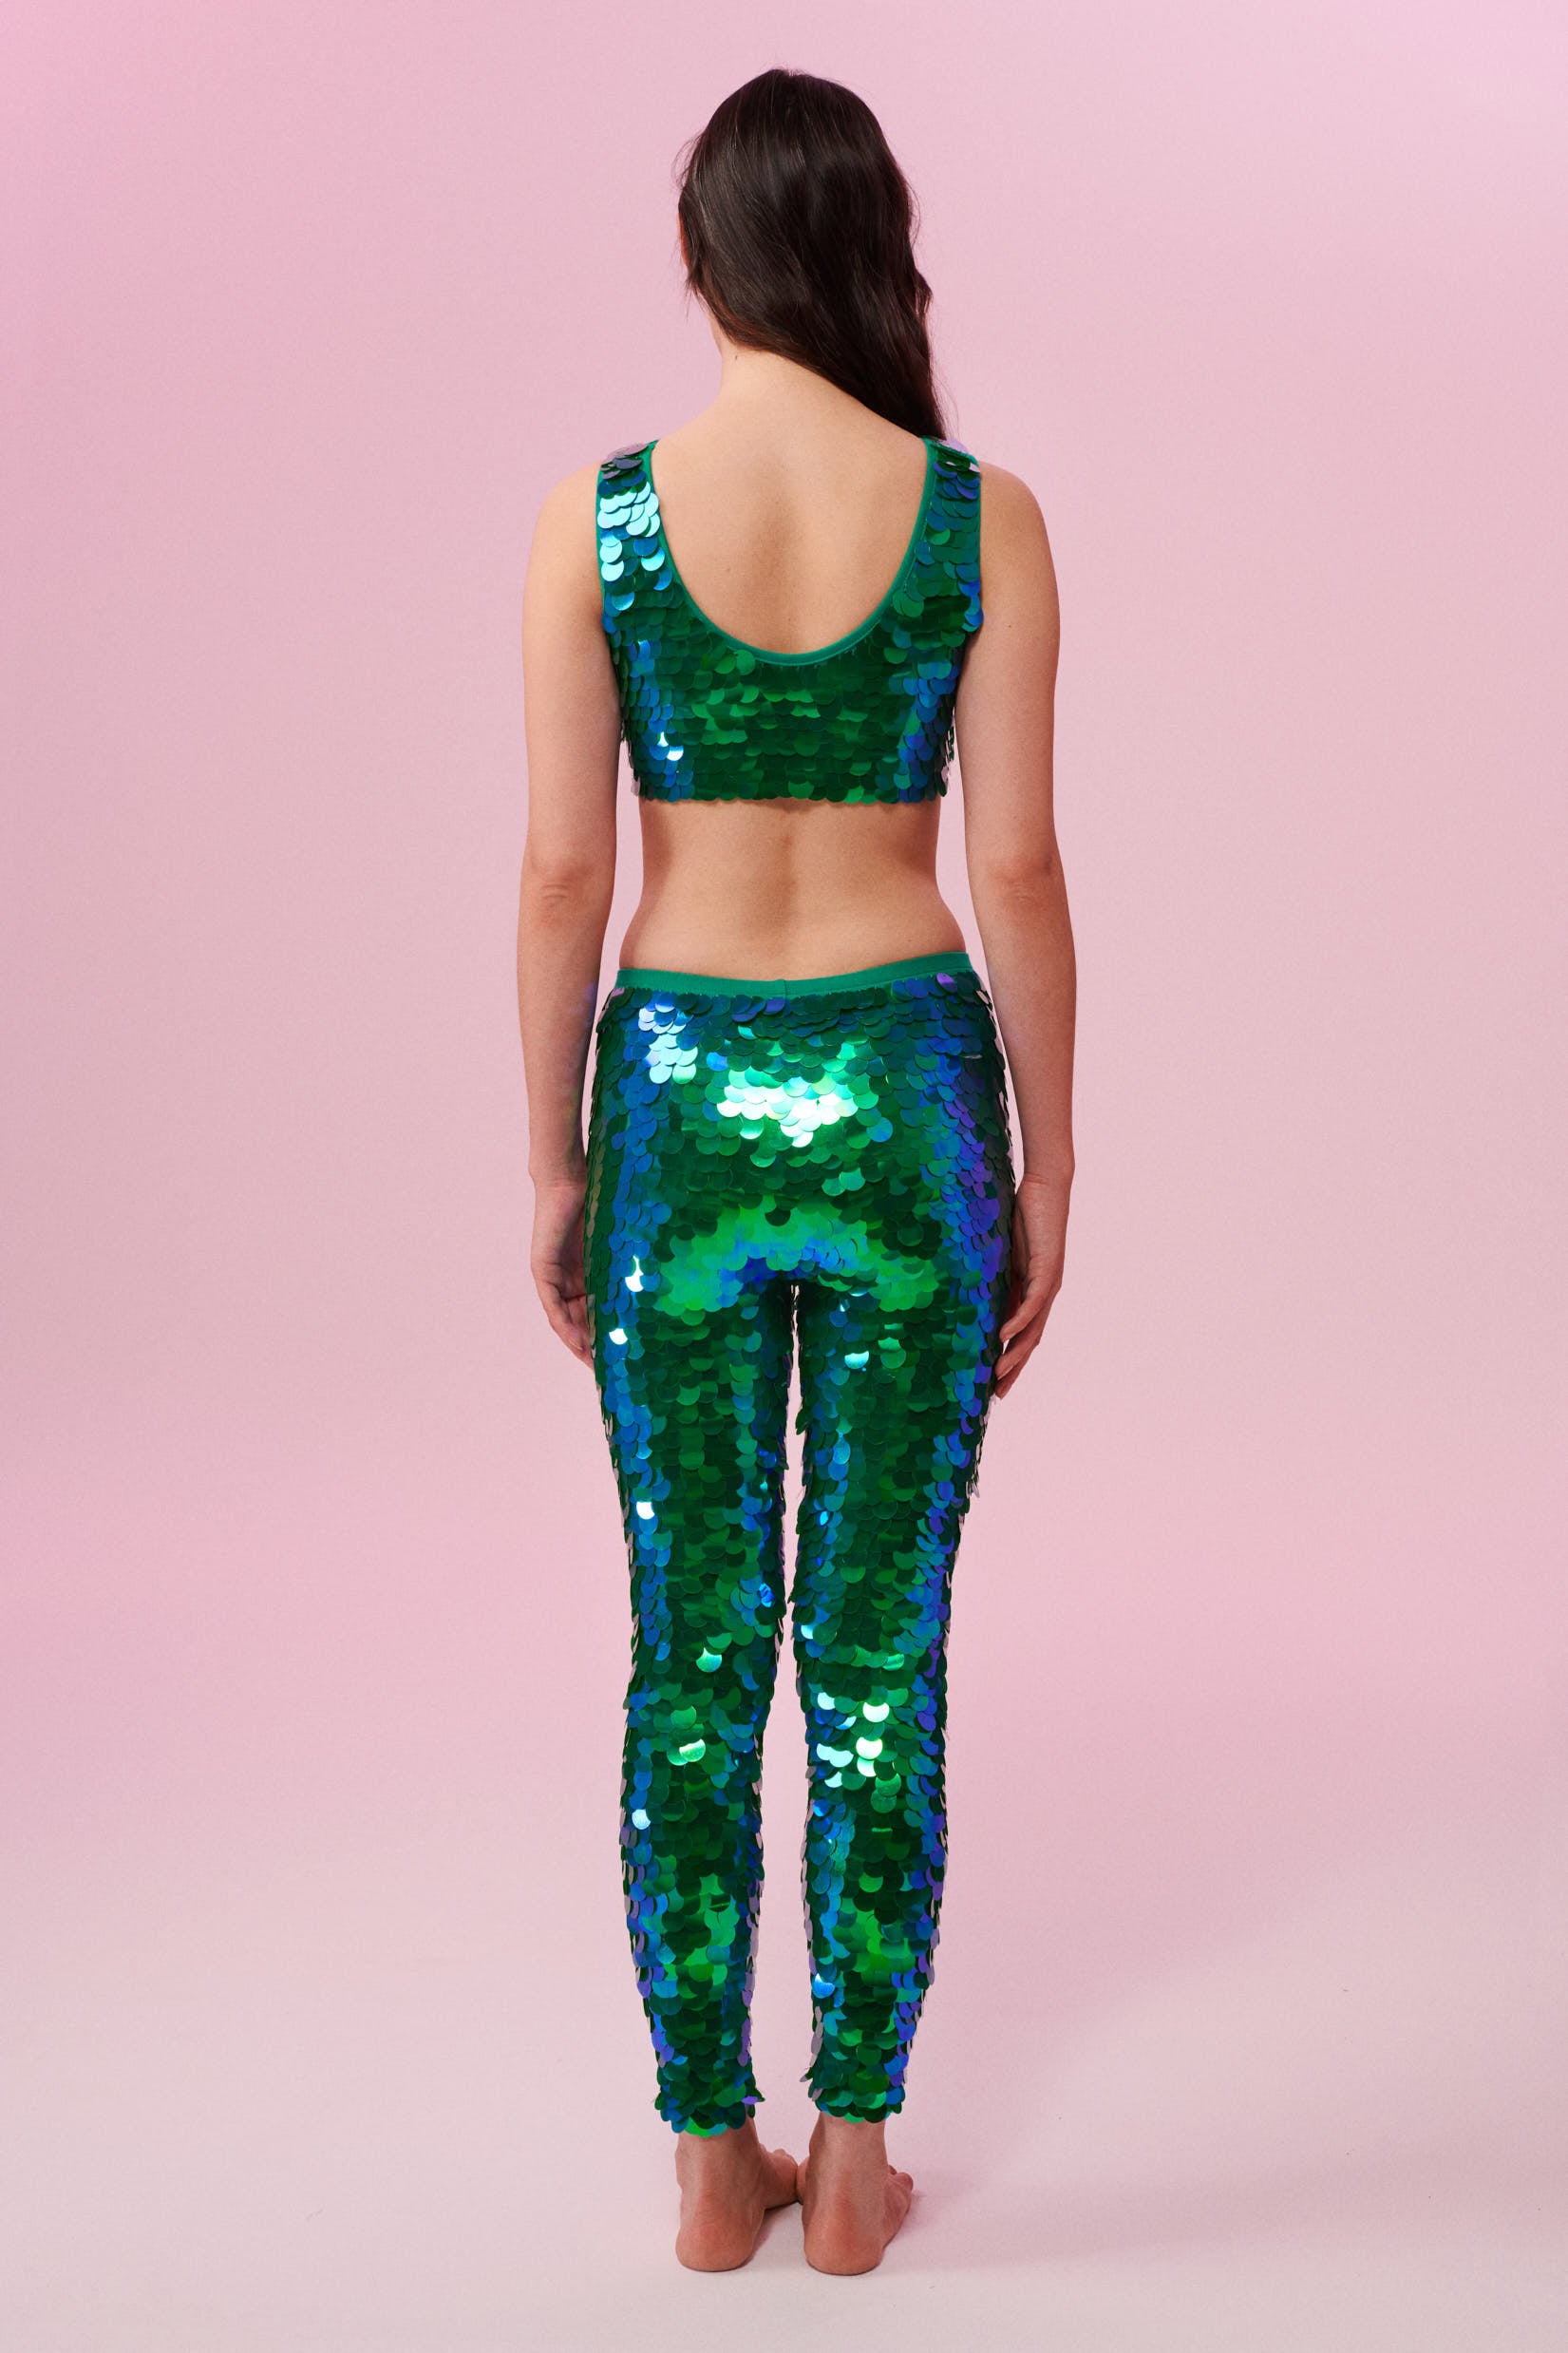 Leggings  Sustainable Festival Clothing in Sequins & Lycra – Wild Thing